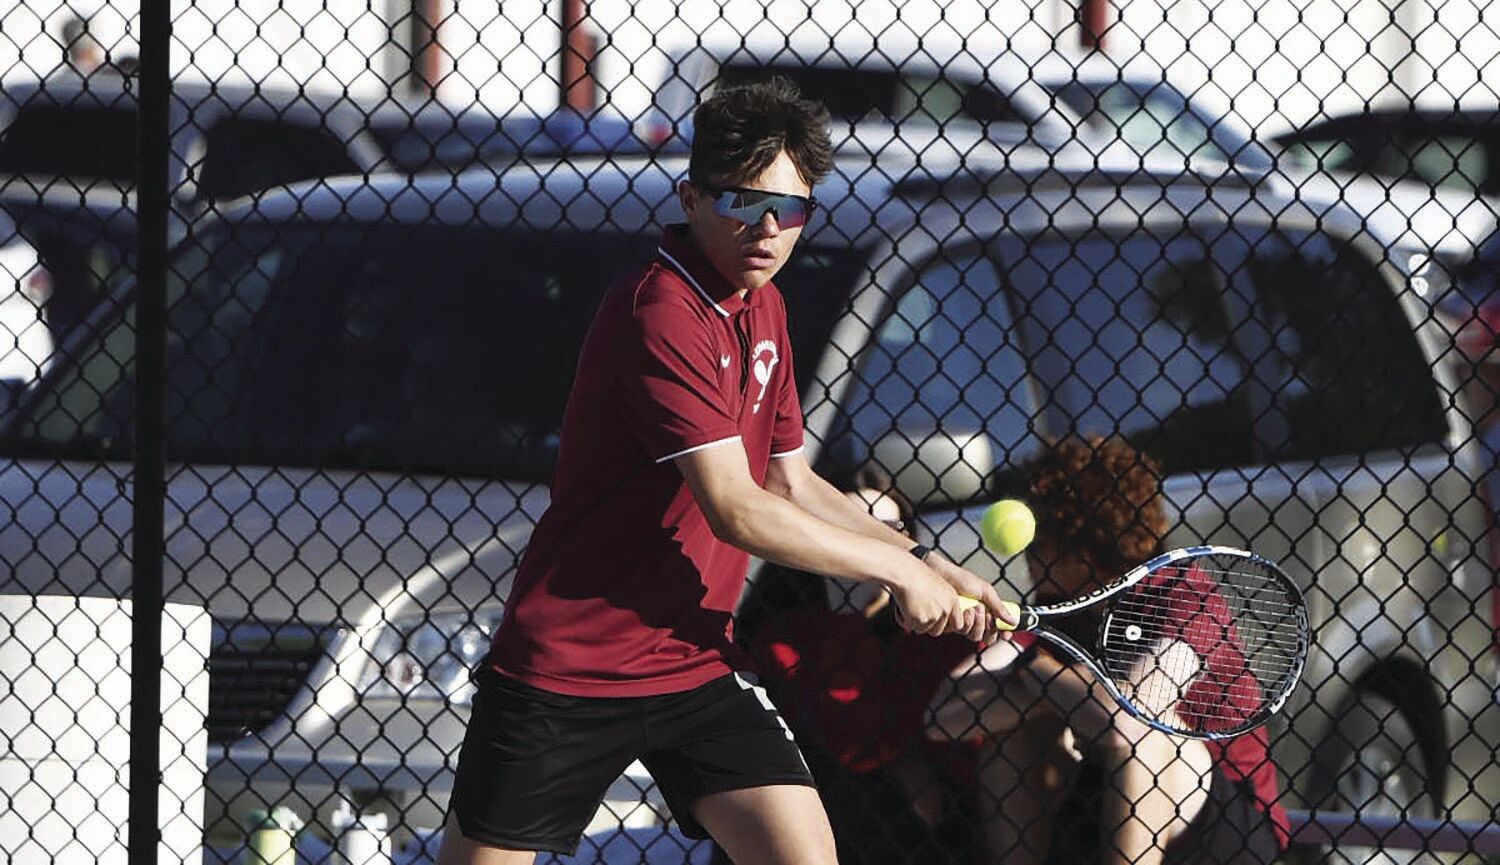 Statement made by Shenandoah boys tennis in dominant win over Glenwood